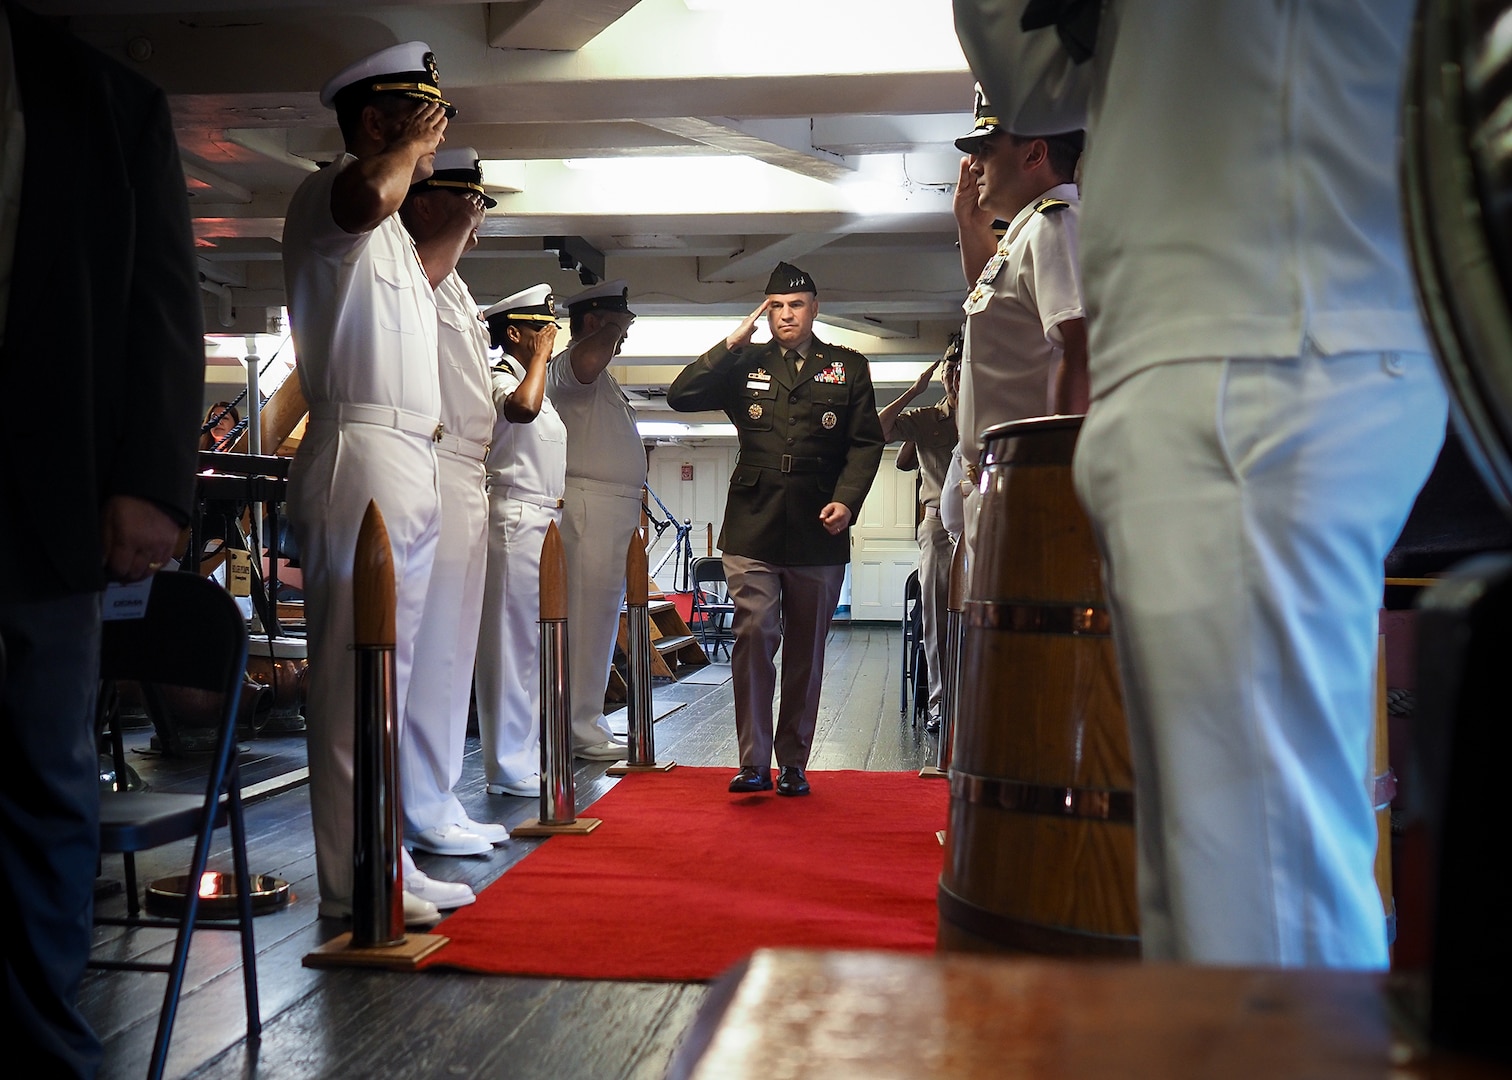 An Army officer salutes as he walks between two rows of sailors